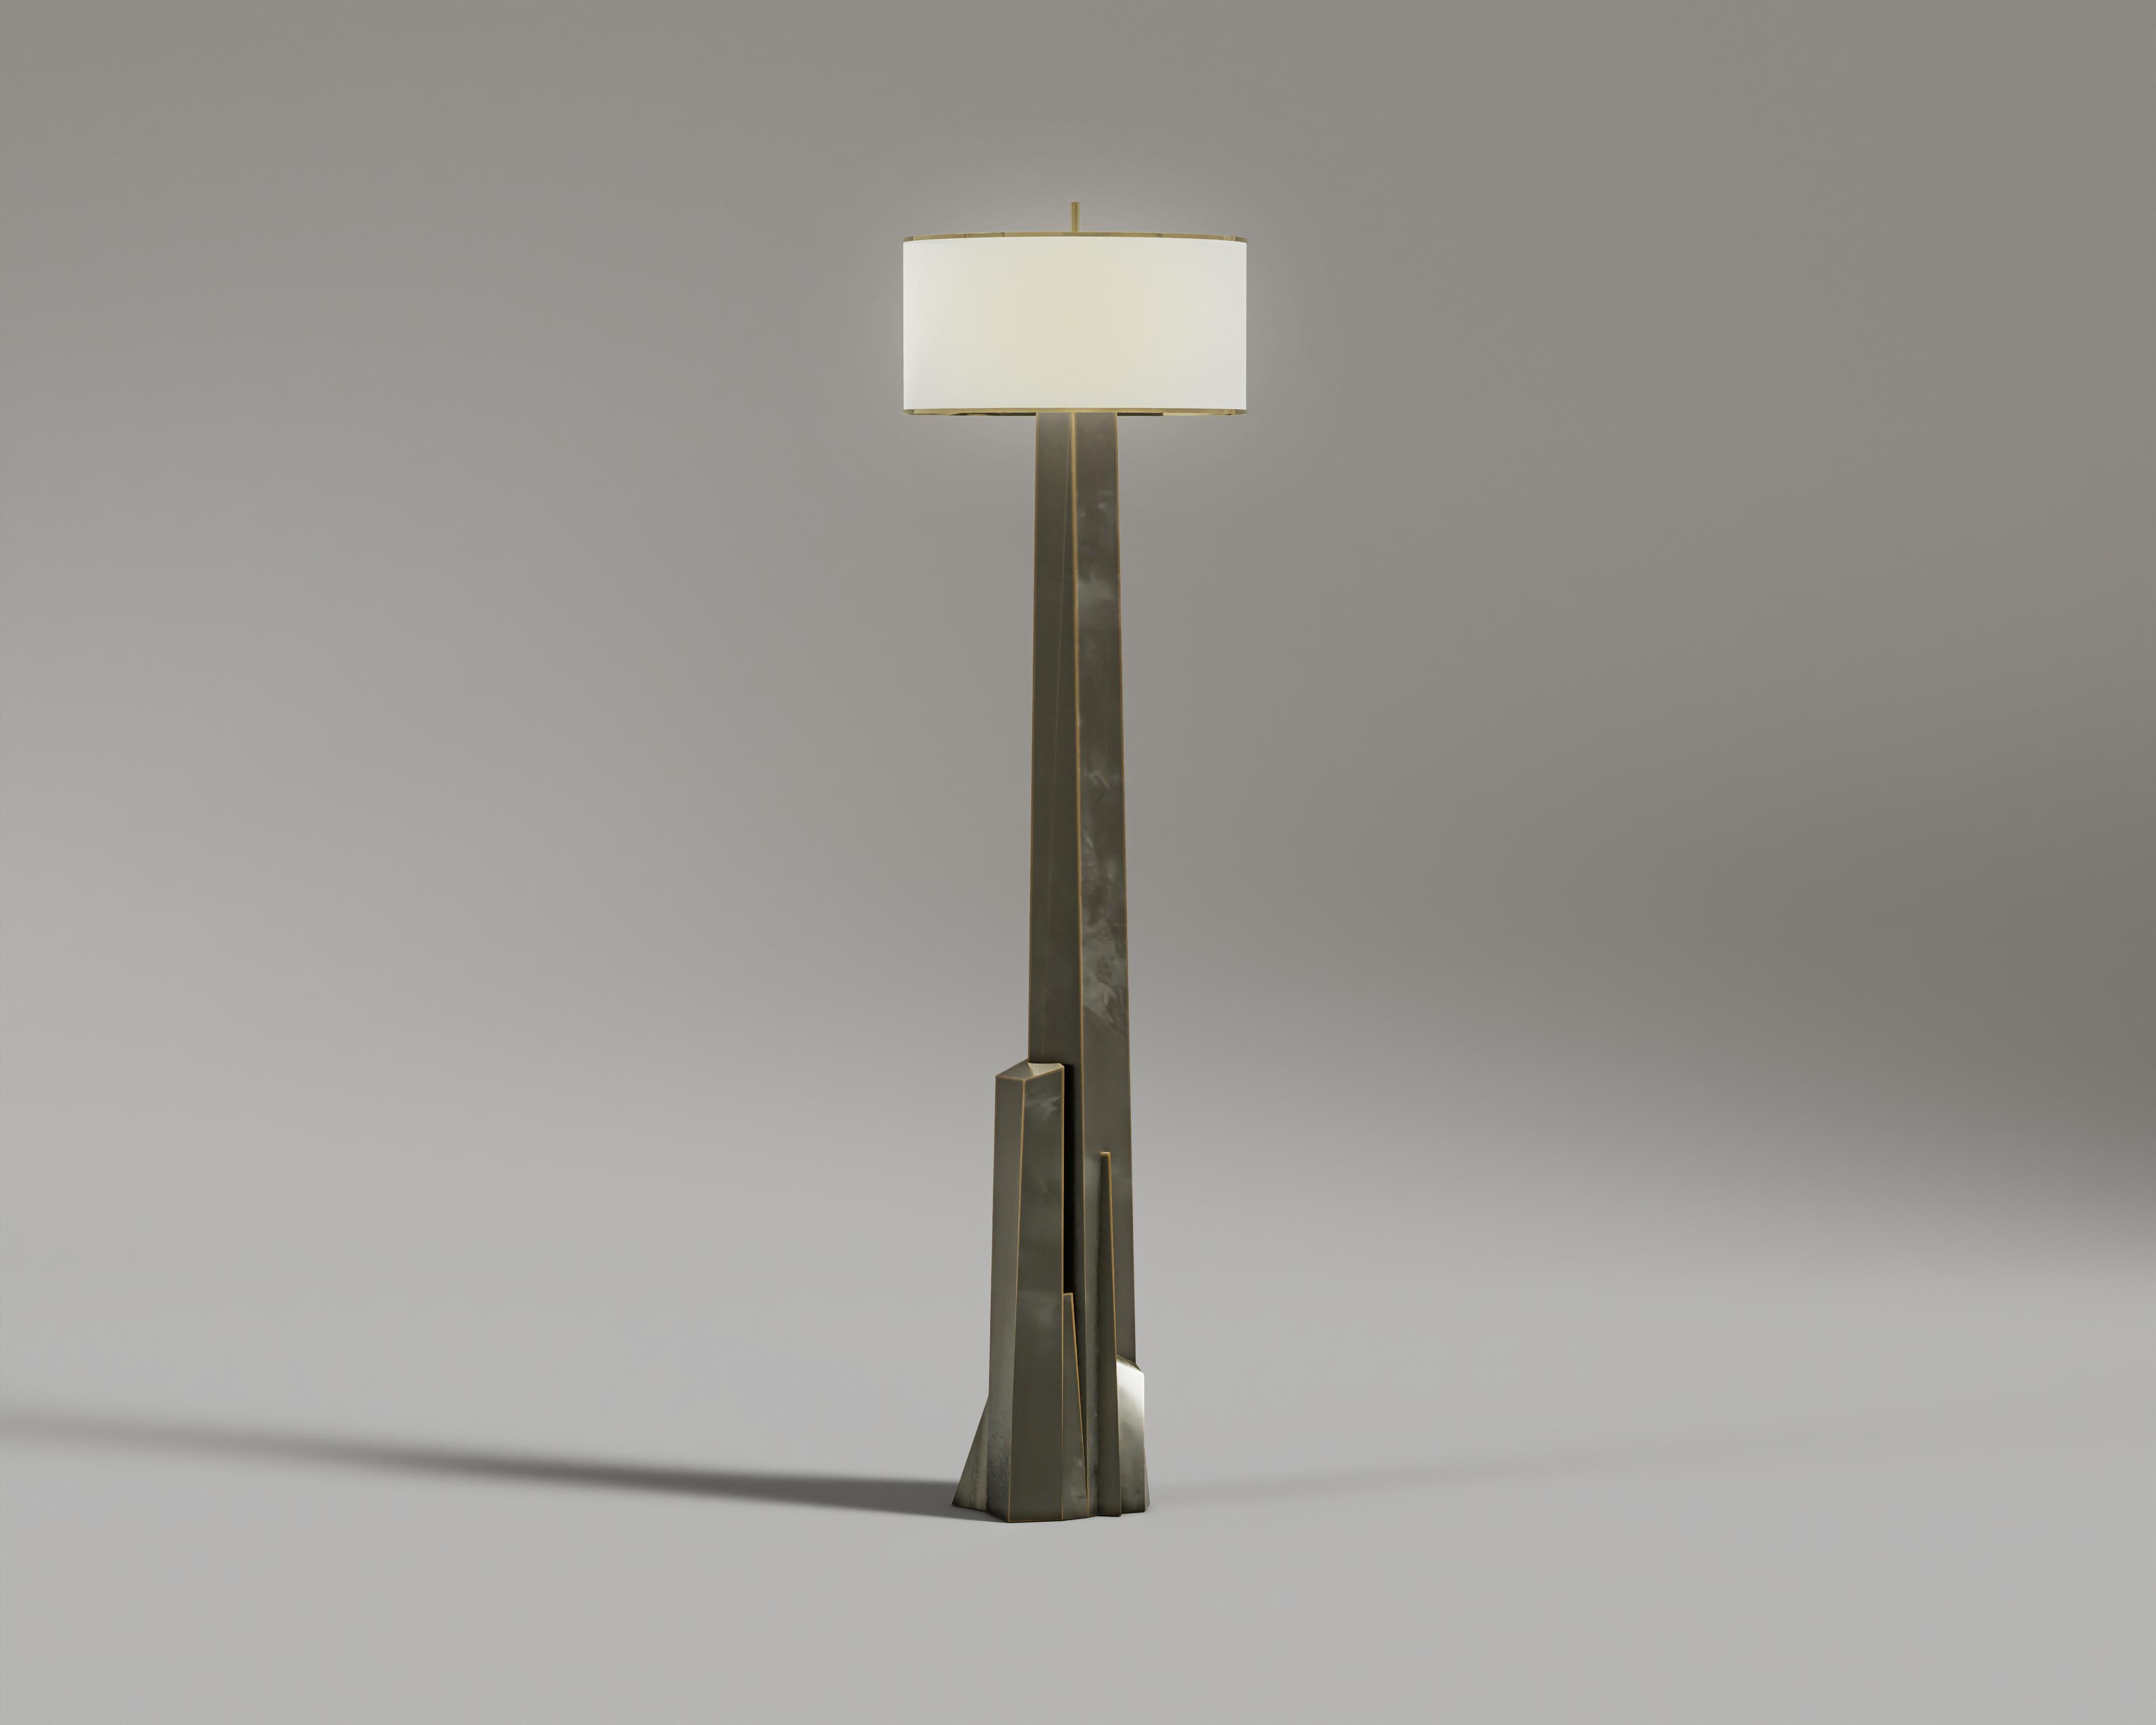 Meta Floor Lamp: 
A unique masterpiece with architectural pieces and bronze frames, brings luxuries to every environment with an elegant luminary. Create an atmosphere of sophisticated warmth in any space with the Meta floor lamp.

Materials and